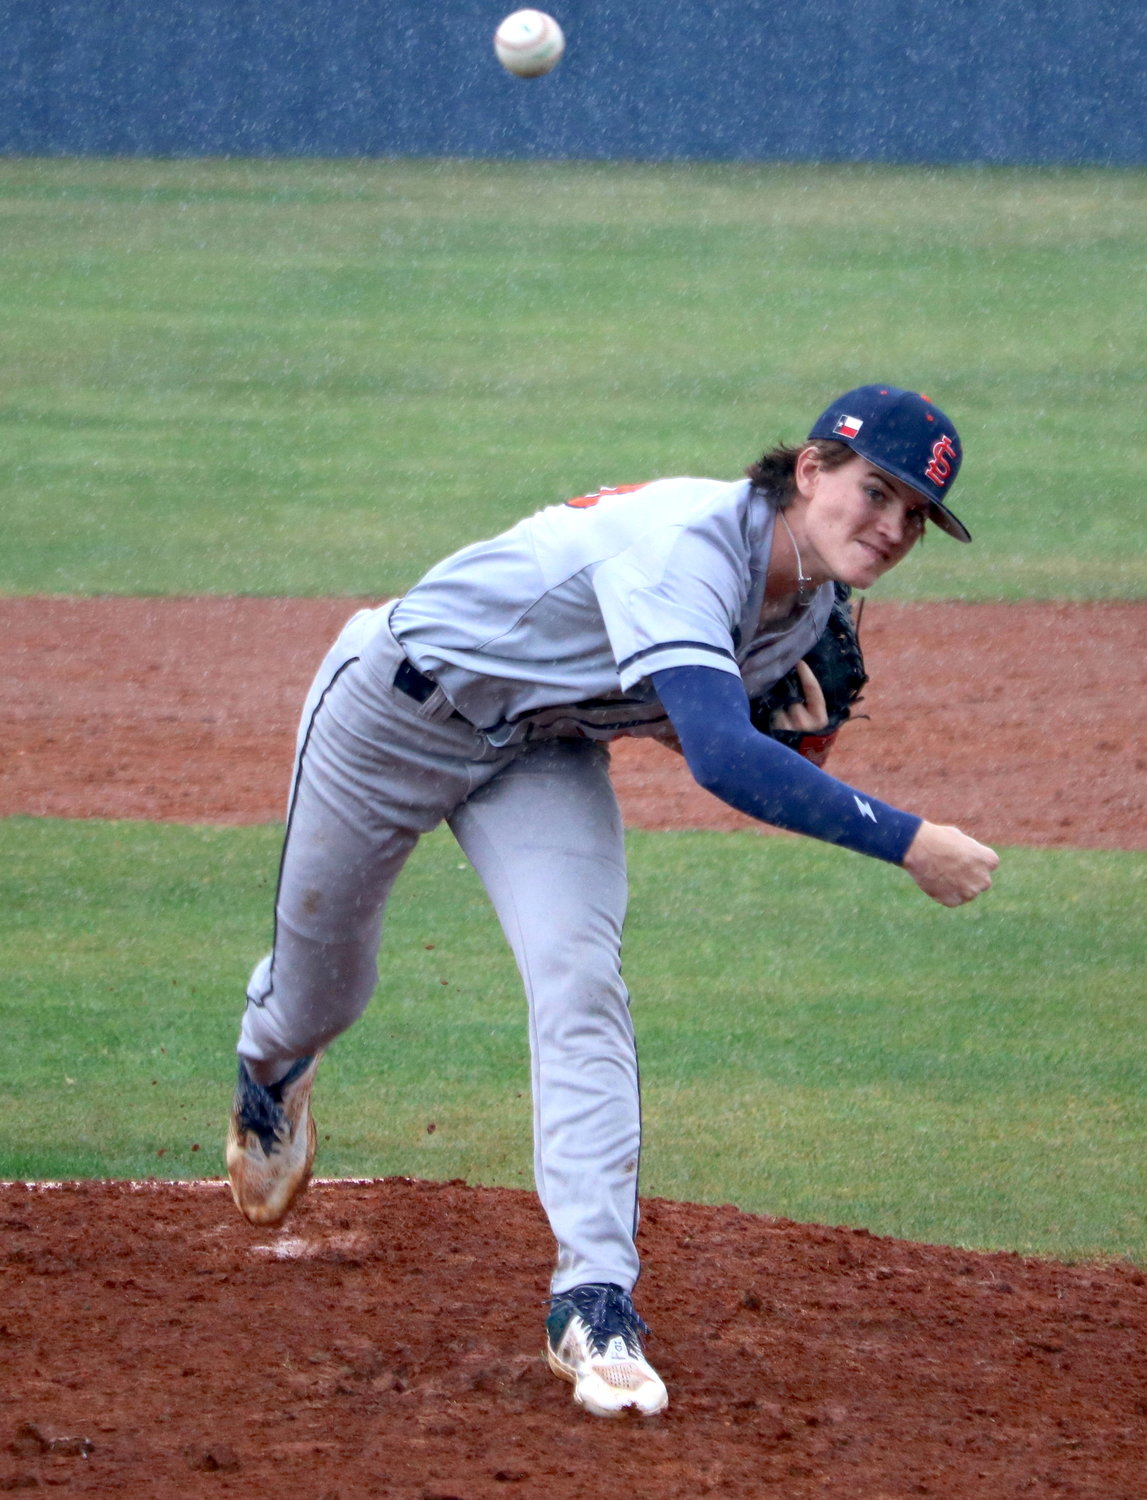 Ty Berra pitches during Thursday's game between Taylor and Seven Lakes at the Taylor baseball field.